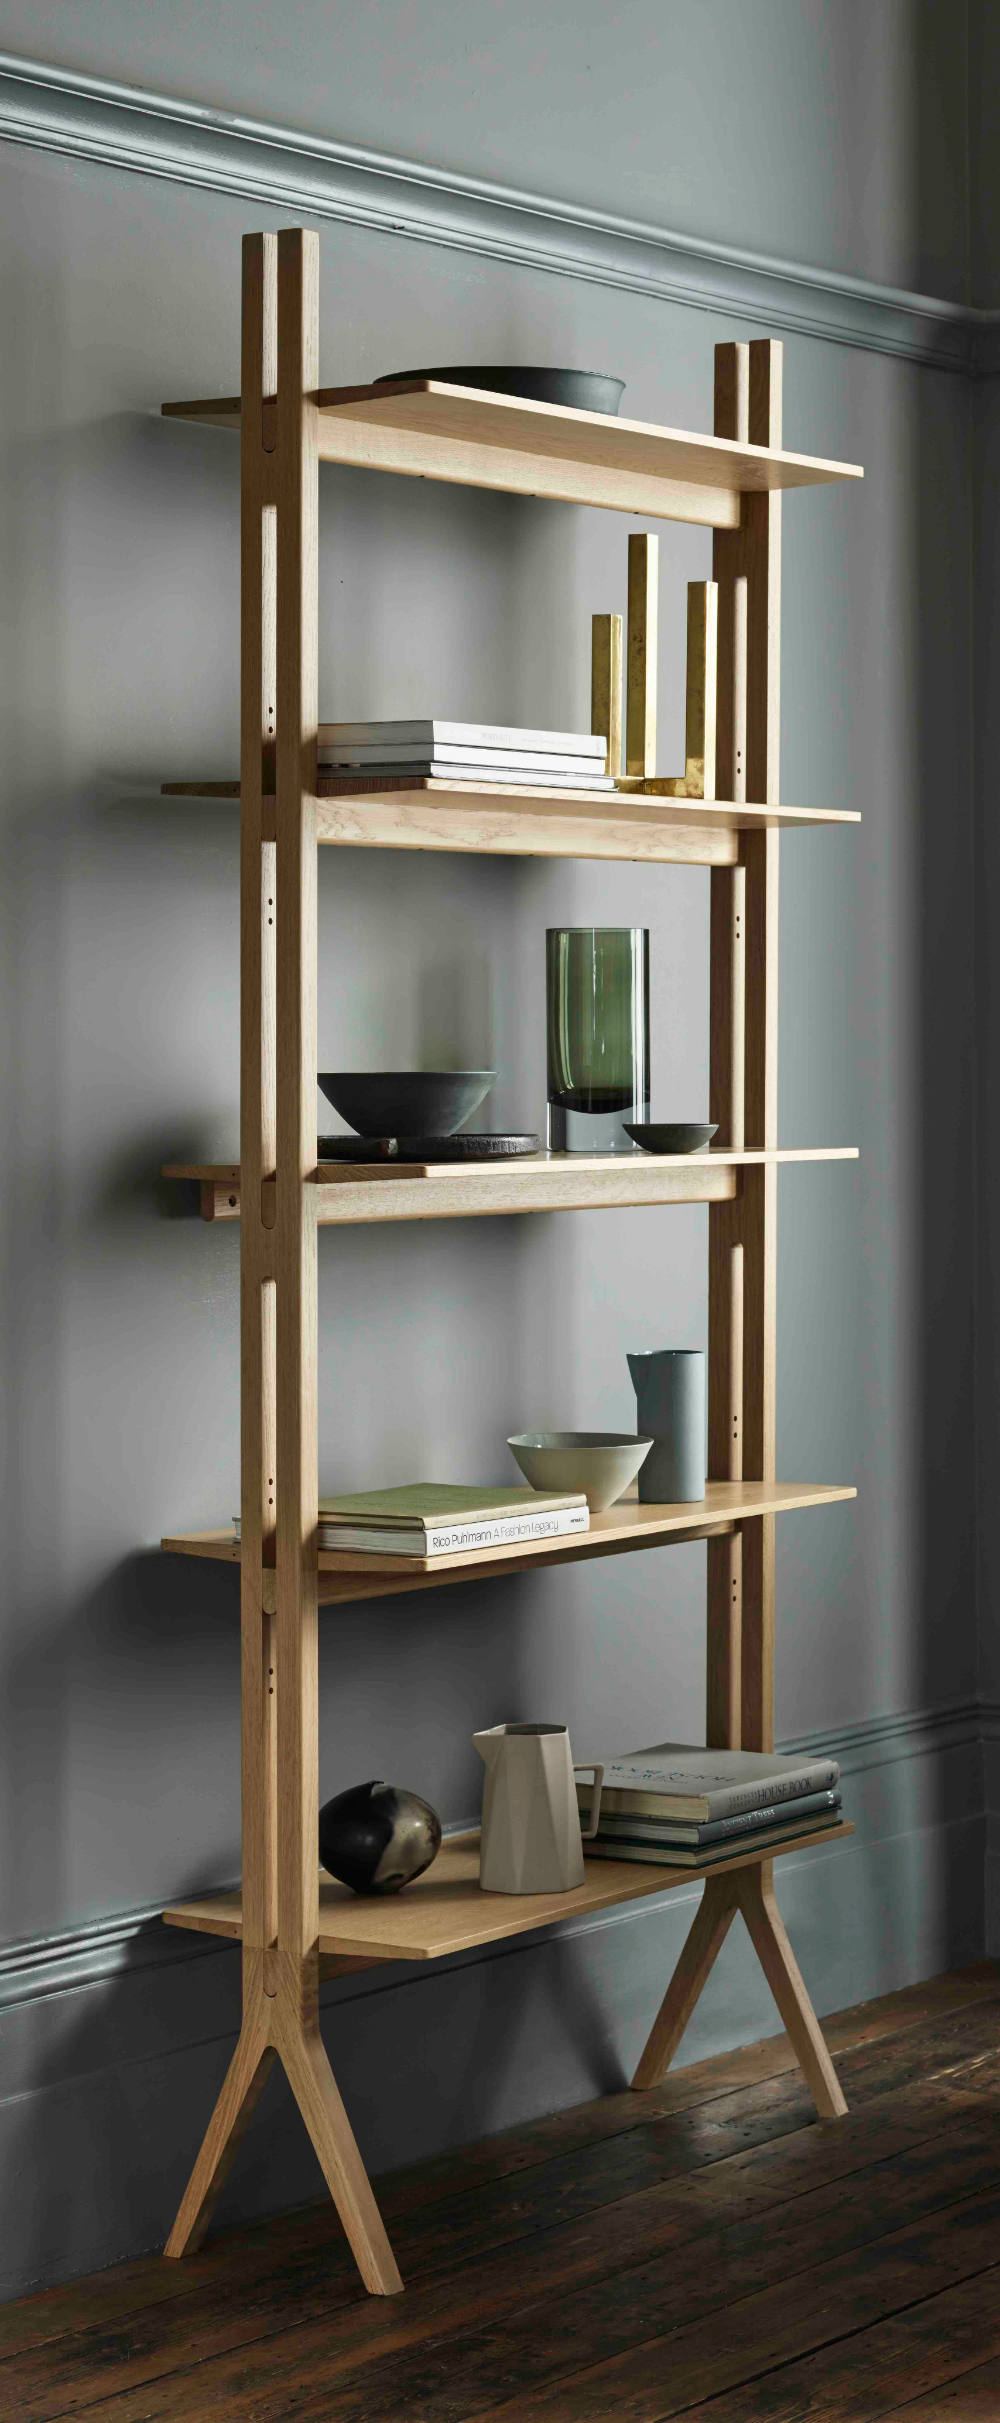 Wooden Shelves Handcrafted Storage Solutions for Your Home with a Natural Feel